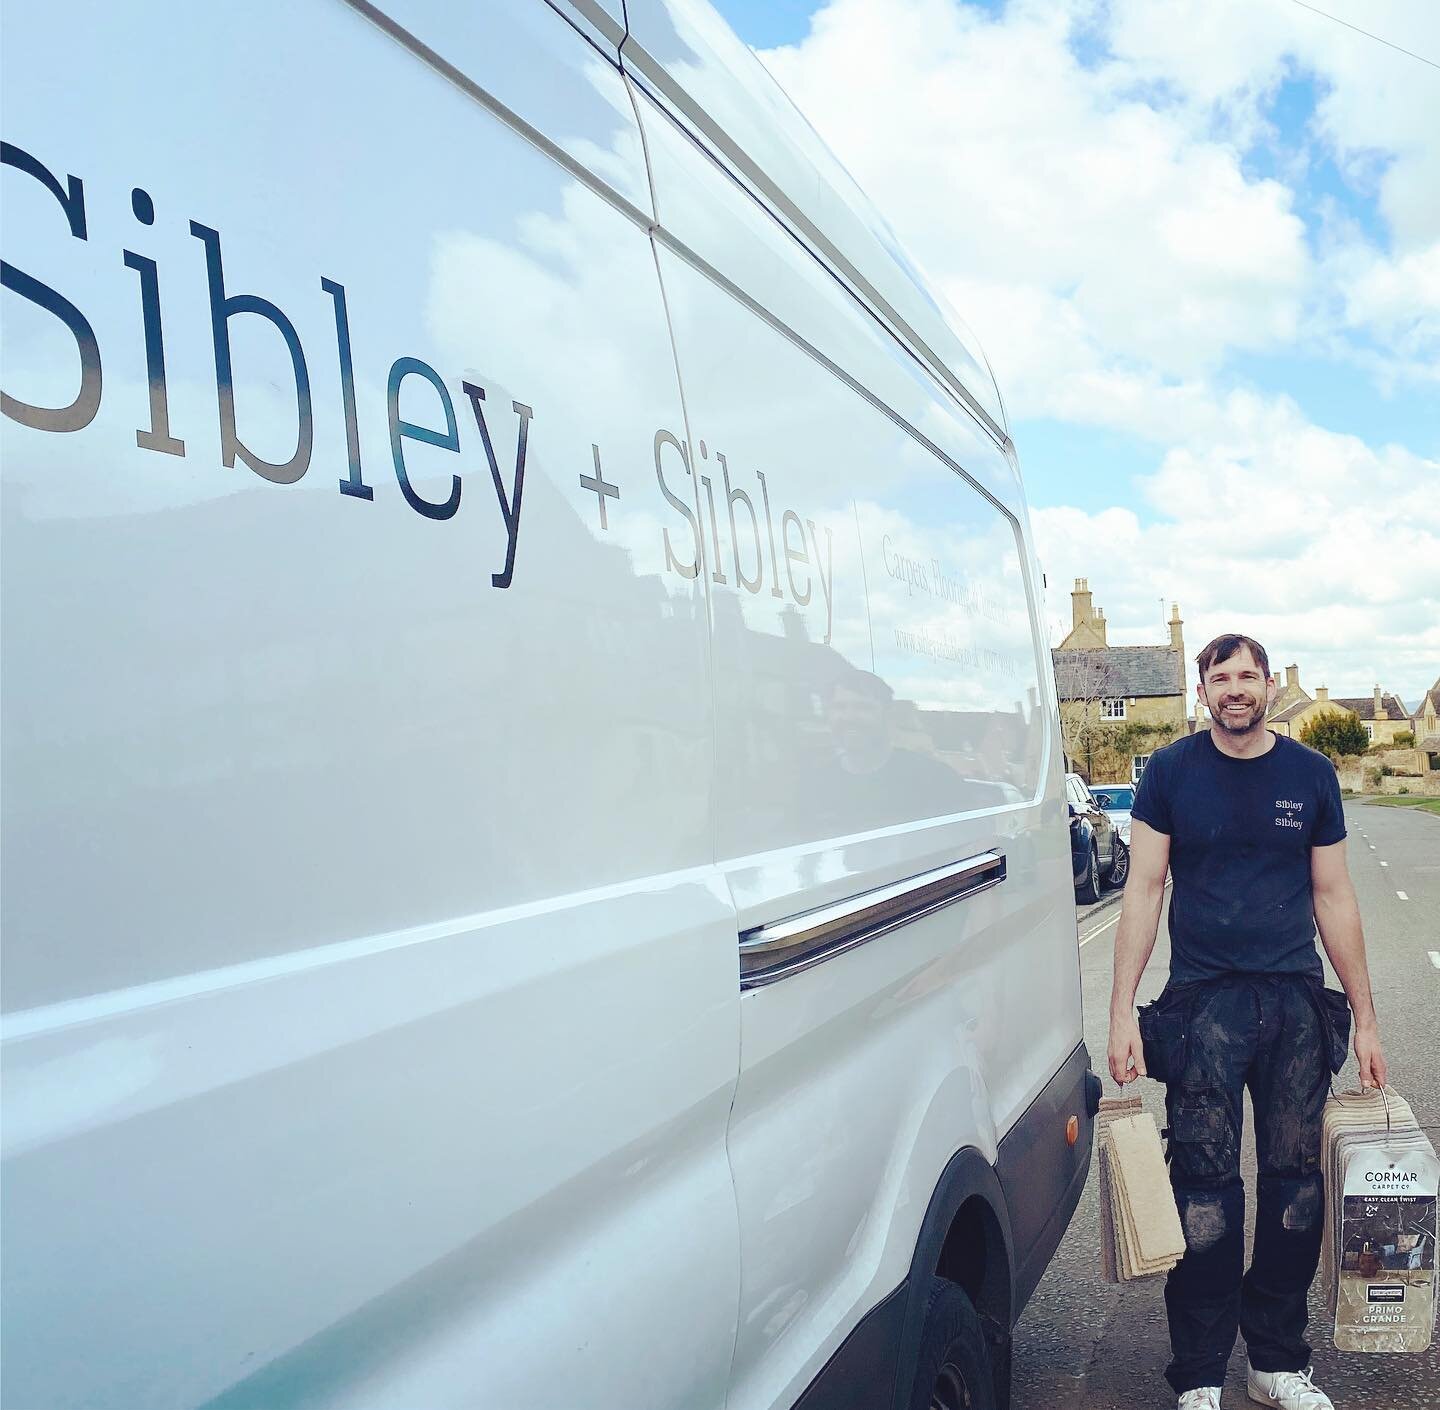 DID YOU KNOW&hellip;
We come to you? We are always out &amp; about in the Sibley + Sibley van around Leamington, Warwickshire &amp; the Cotswolds visiting our clients. If you see us give us a wave 👋 

We bring samples to you to view at home. Provide